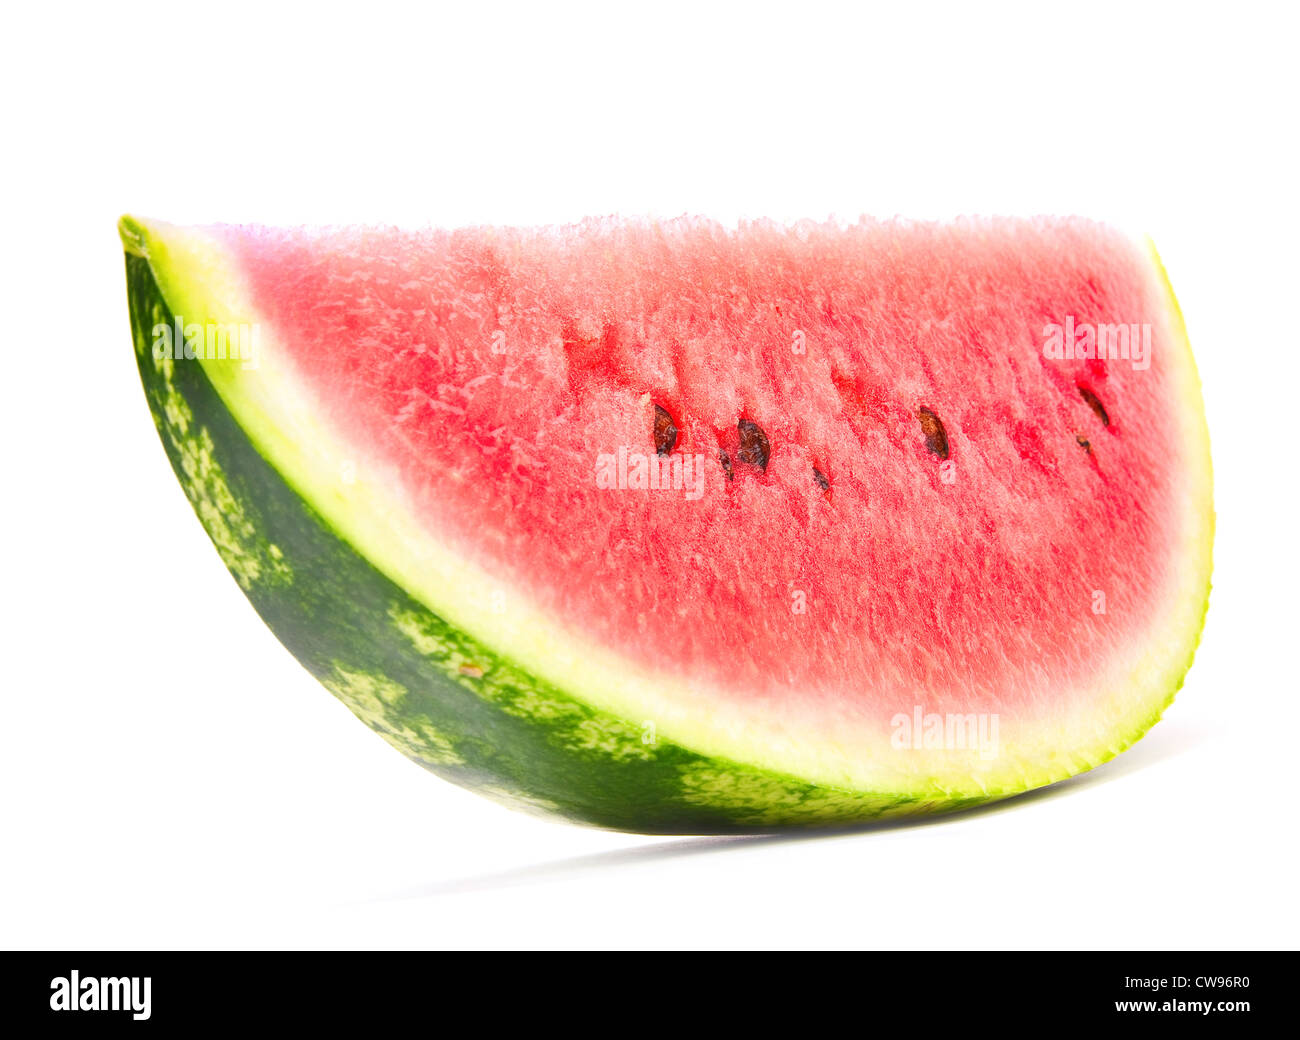 Watermelon slice detail isolated on white background Stock Photo